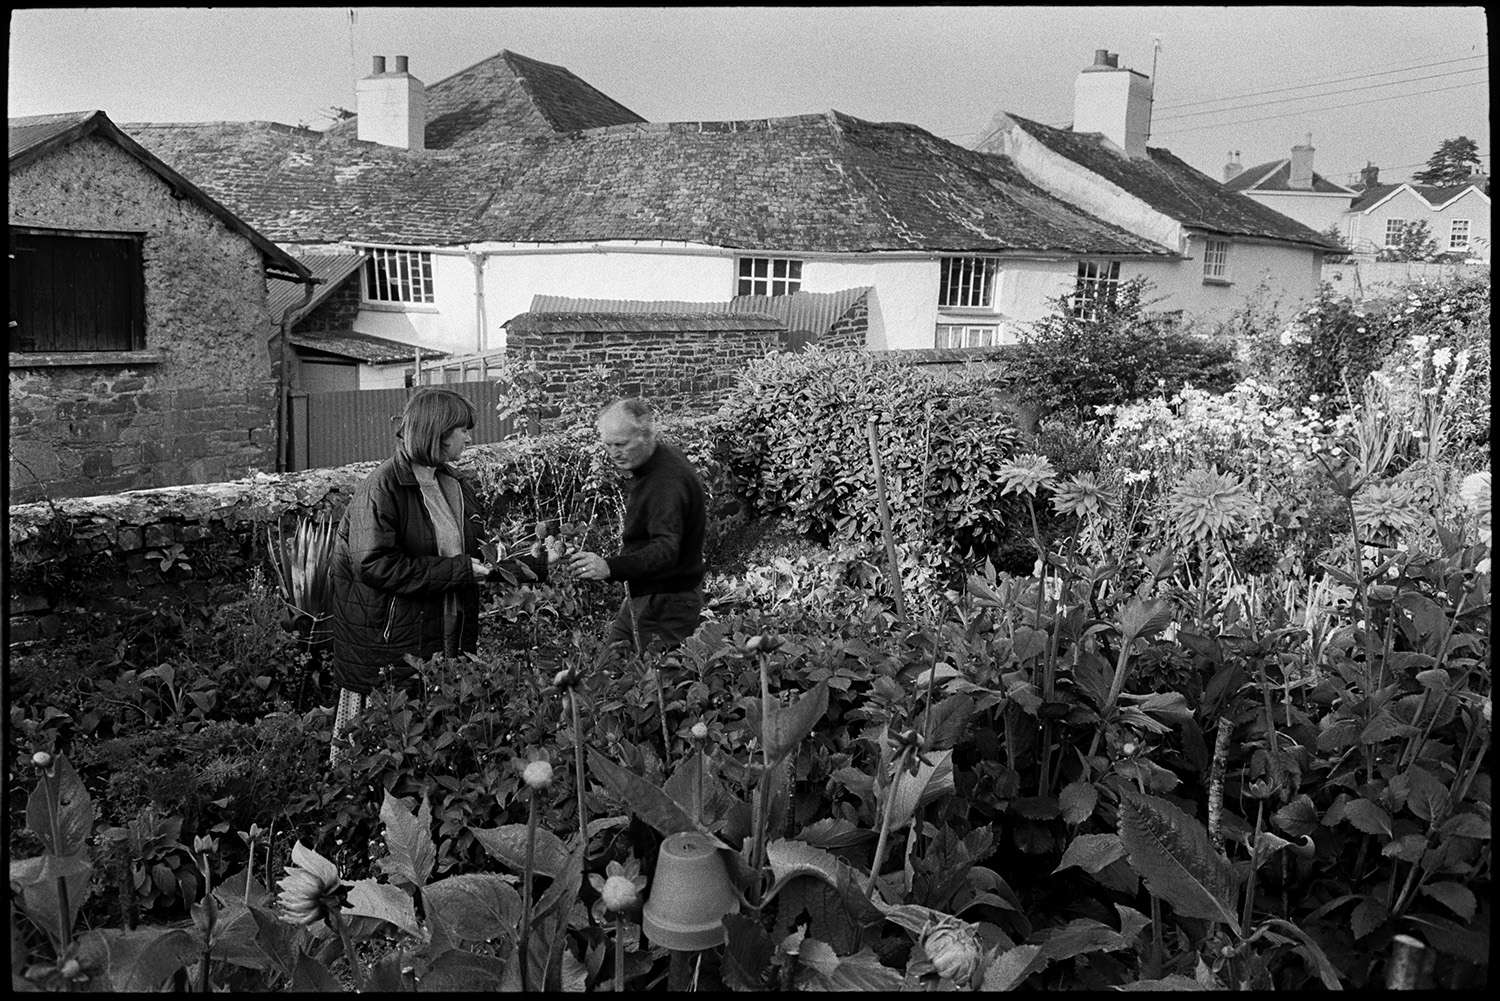 Preparing vegetables and flowers, flower show in garden with greenhouse. 
[Michael Mitchell and Rose Mitchell cutting flowers in the garden at Pear Tree Cottage, Aller Road, Dolton, to enter into the Dolton Flower Show.]